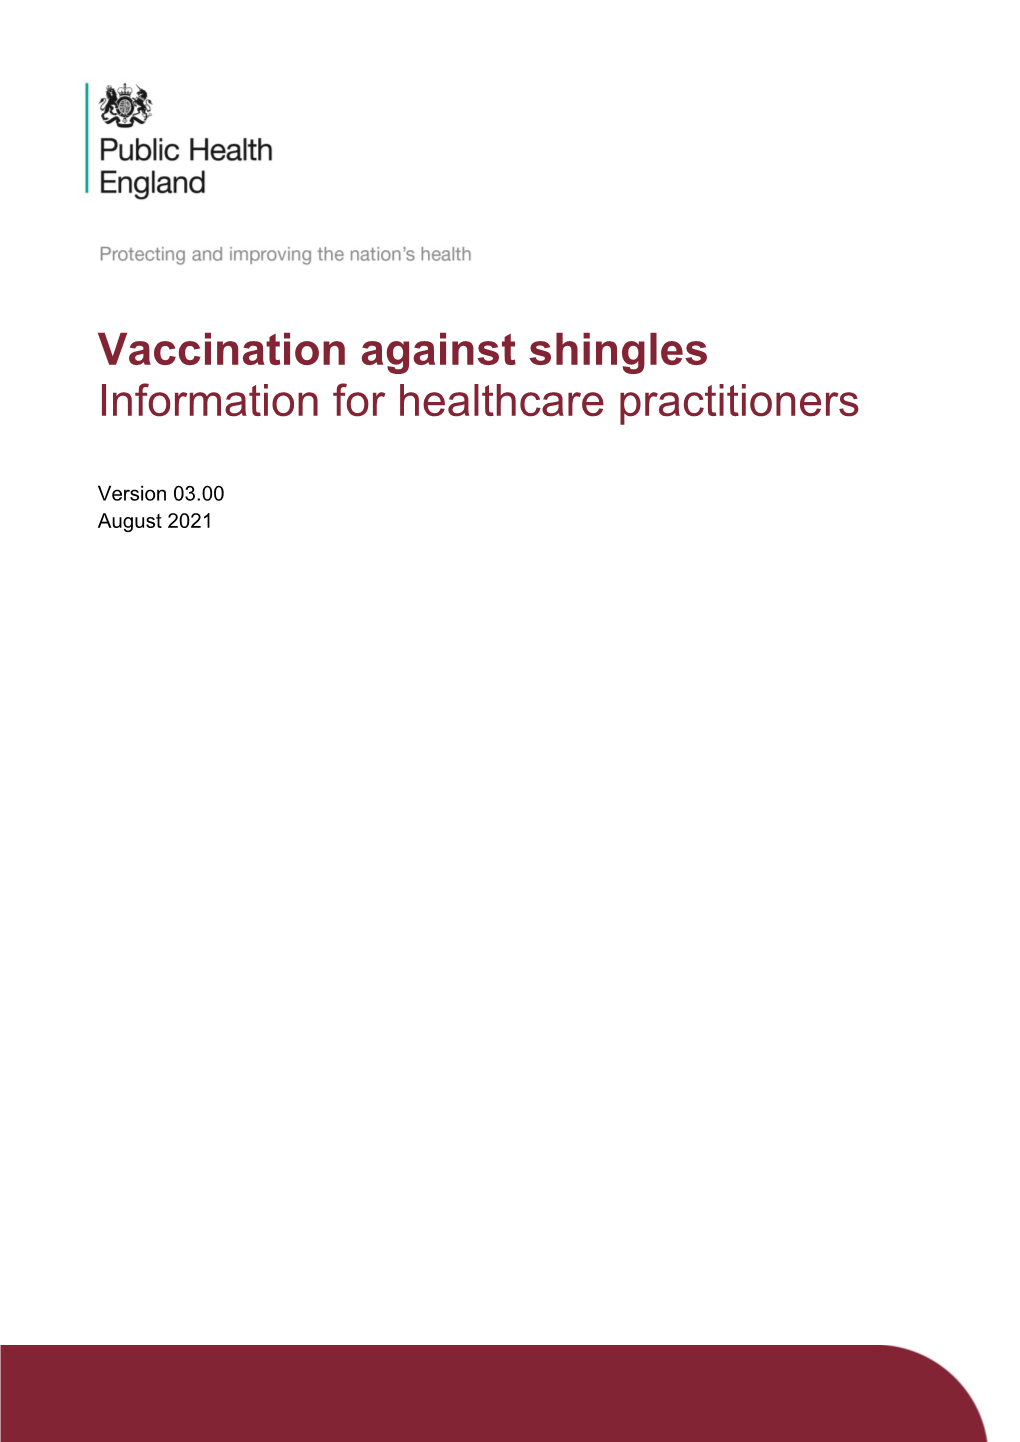 Vaccination Against Shingles Information for Healthcare Practitioners